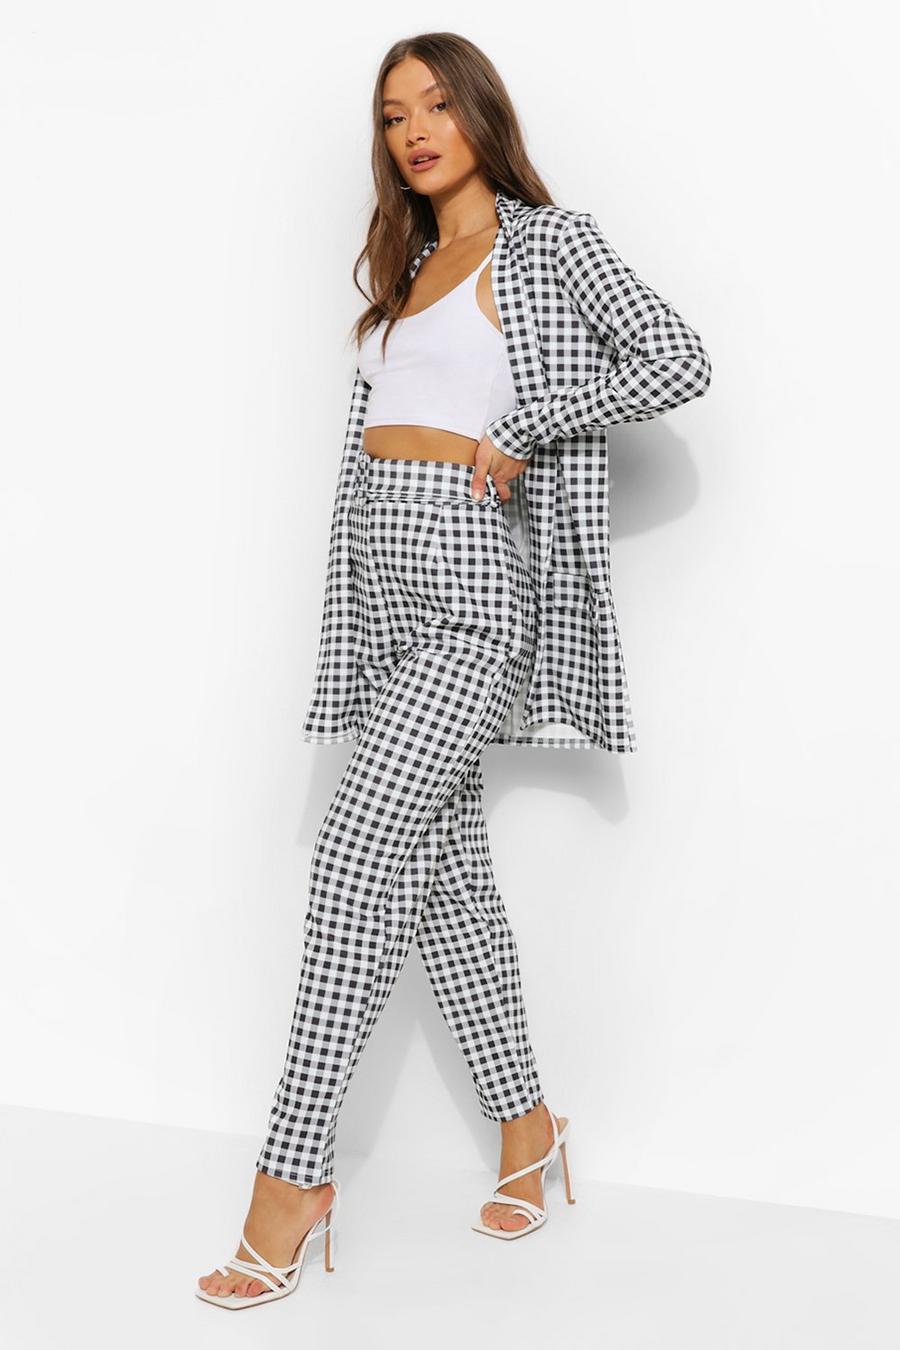 Black Gingham Blazer And Self Fabric Belted Pants